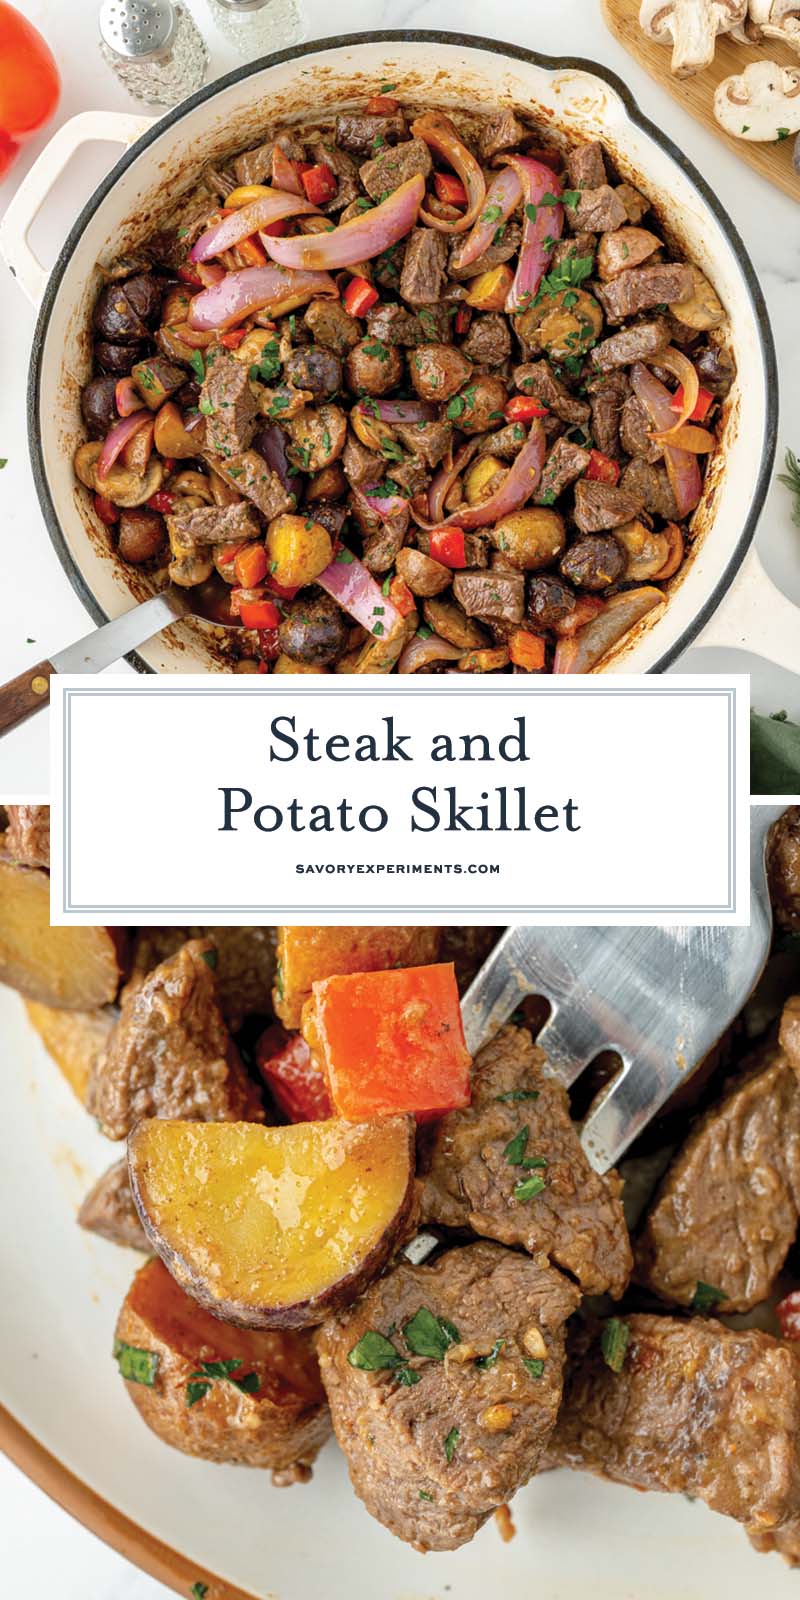 collage of steak and potato skillet